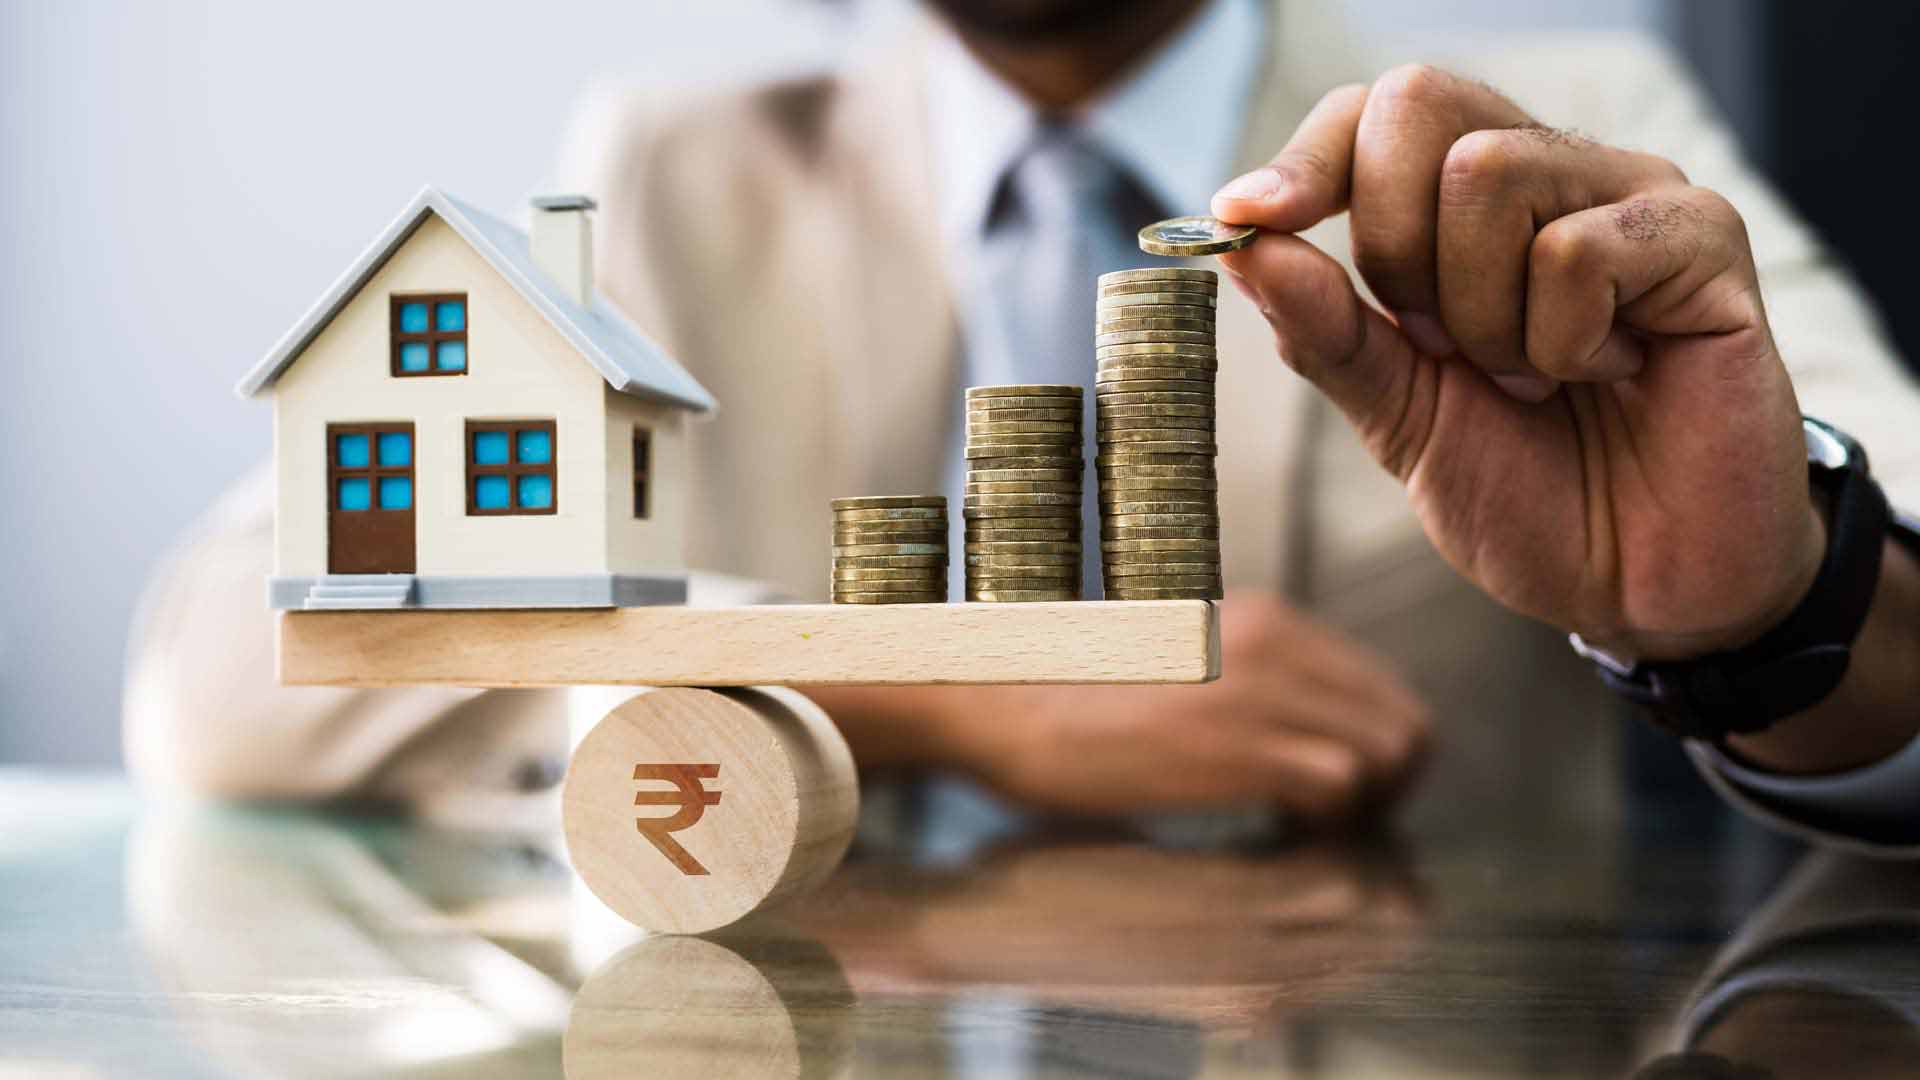 Real Estate Investment Companies in India